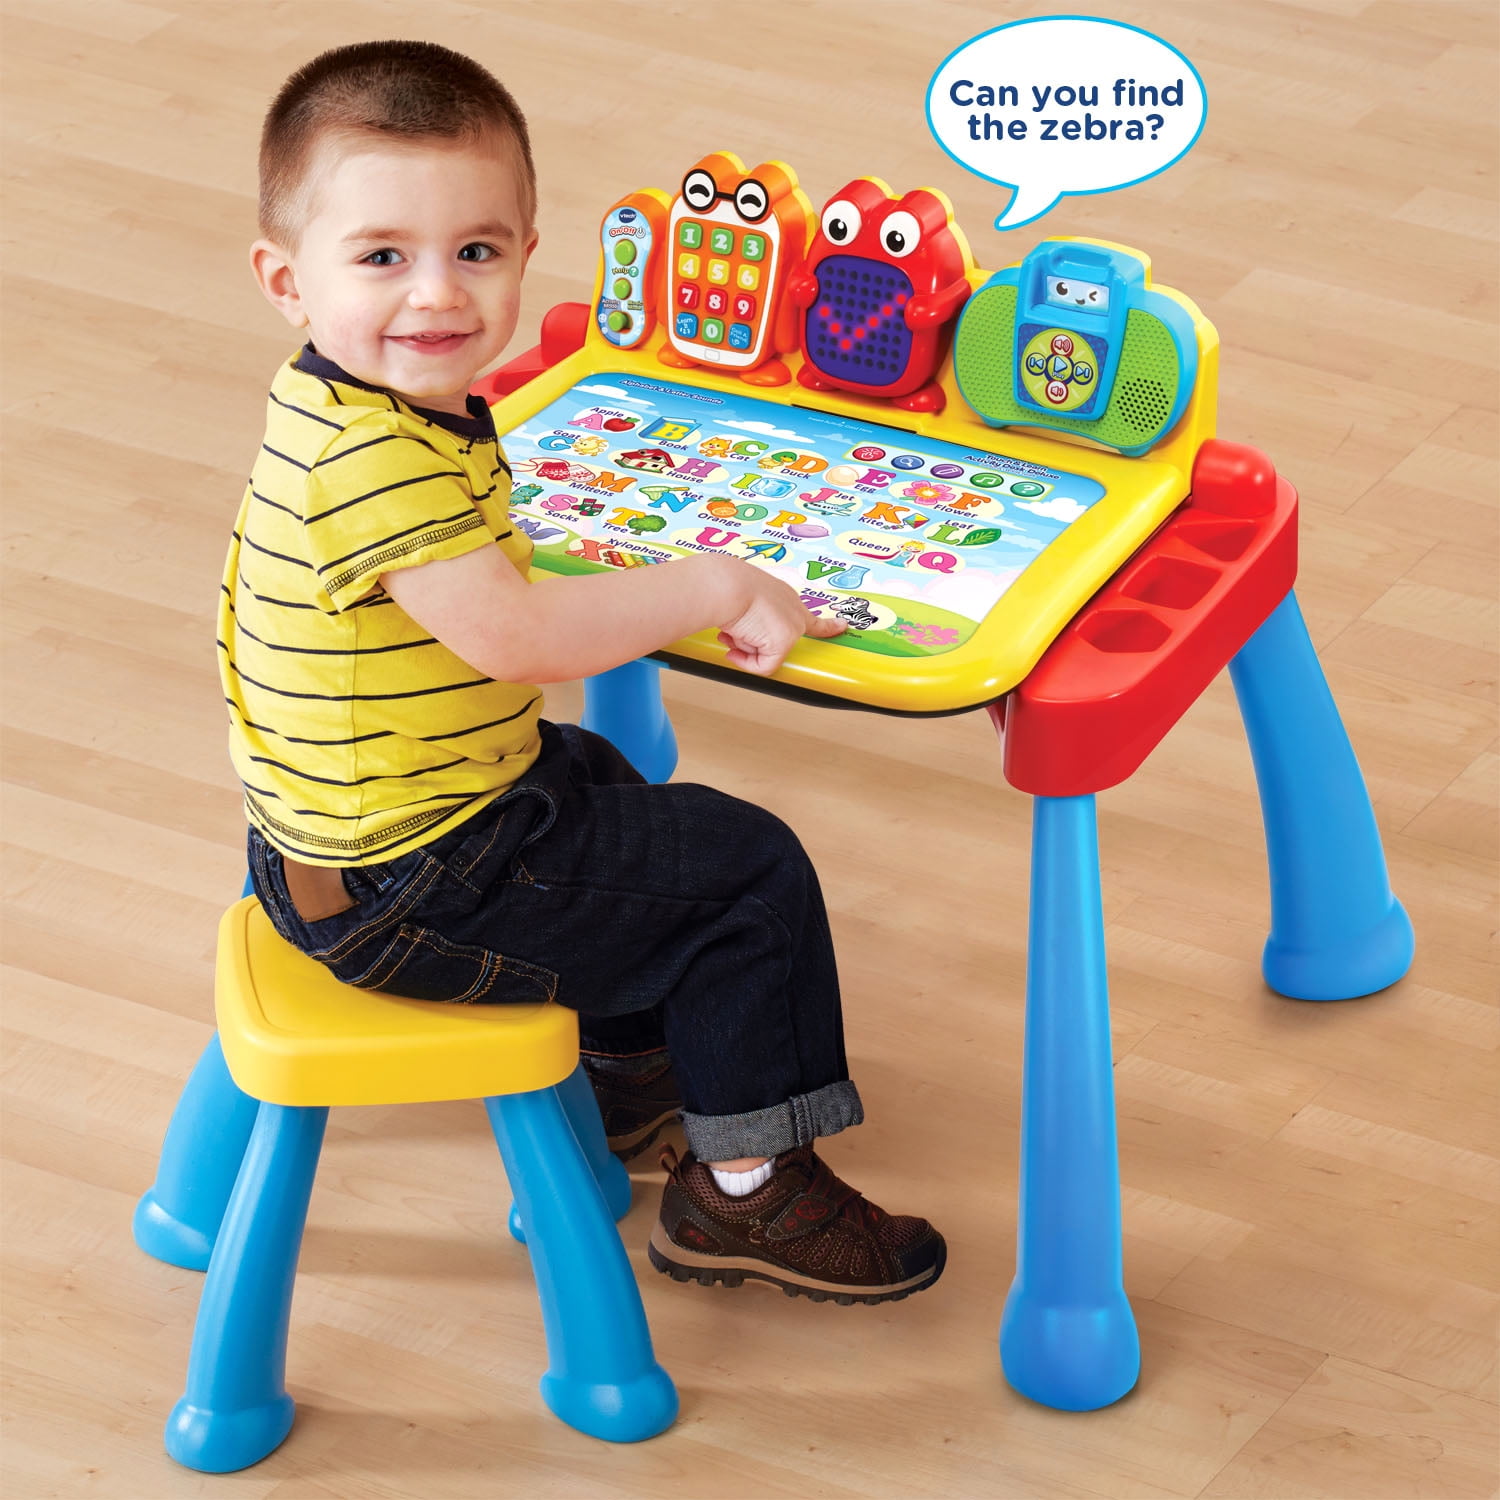 Vtech Touch & Learn Activity Desk 80-194800 for sale online 